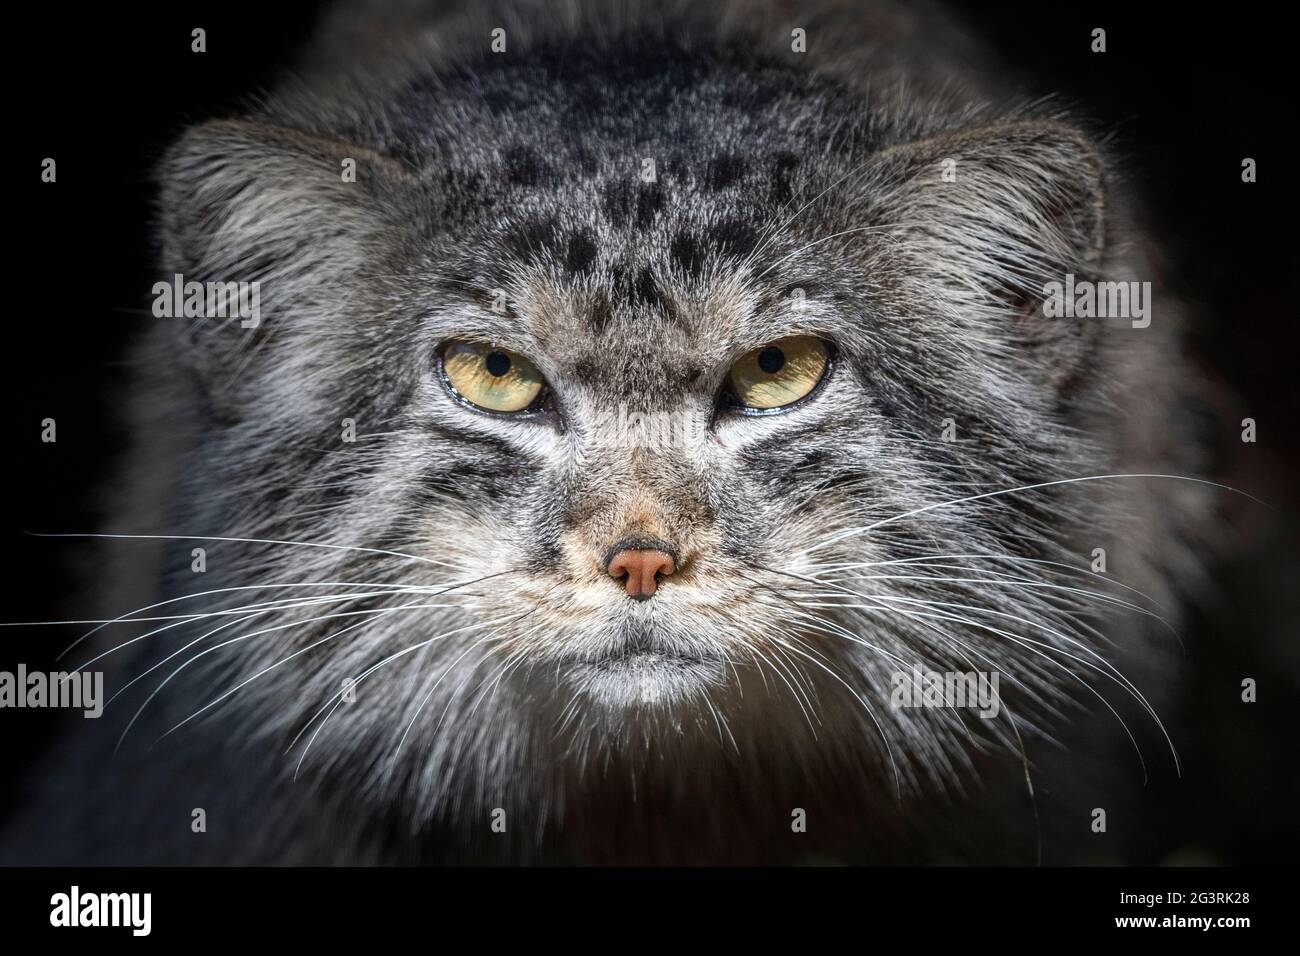 Pallas cat staring into camera, with dark background Stock Photo